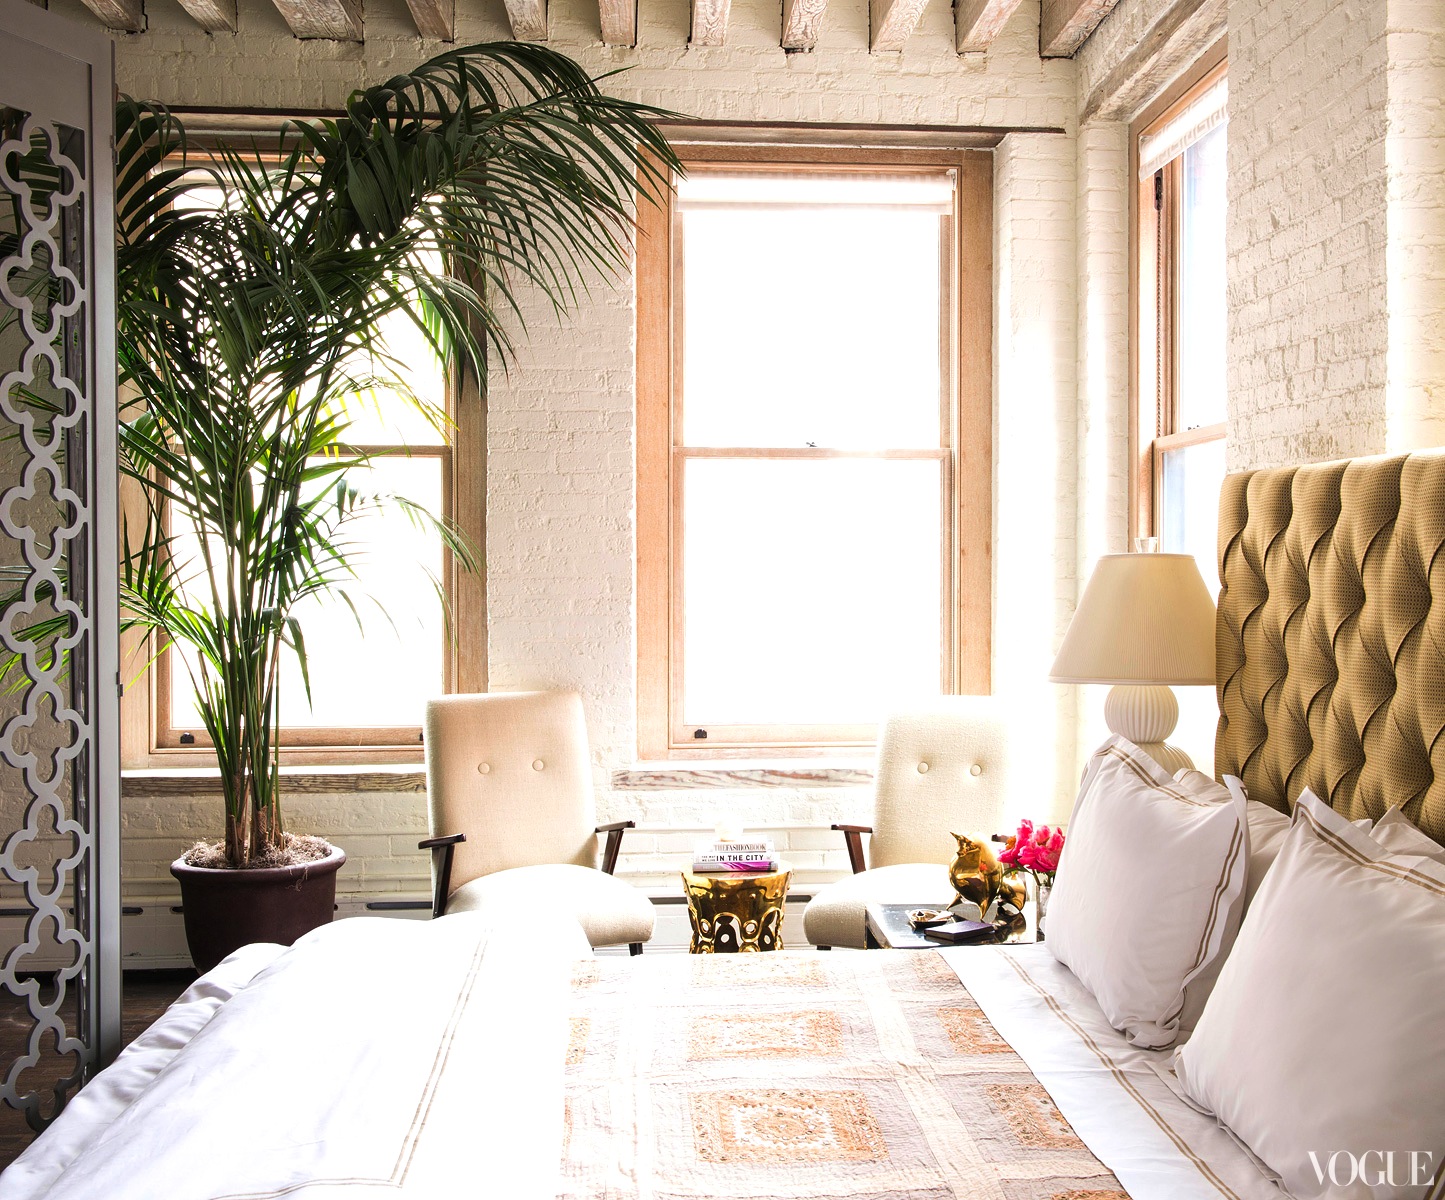 COCOCOZY: A JEWEL OF AN APARTMENT - NEW YORK LOFT LIVING!